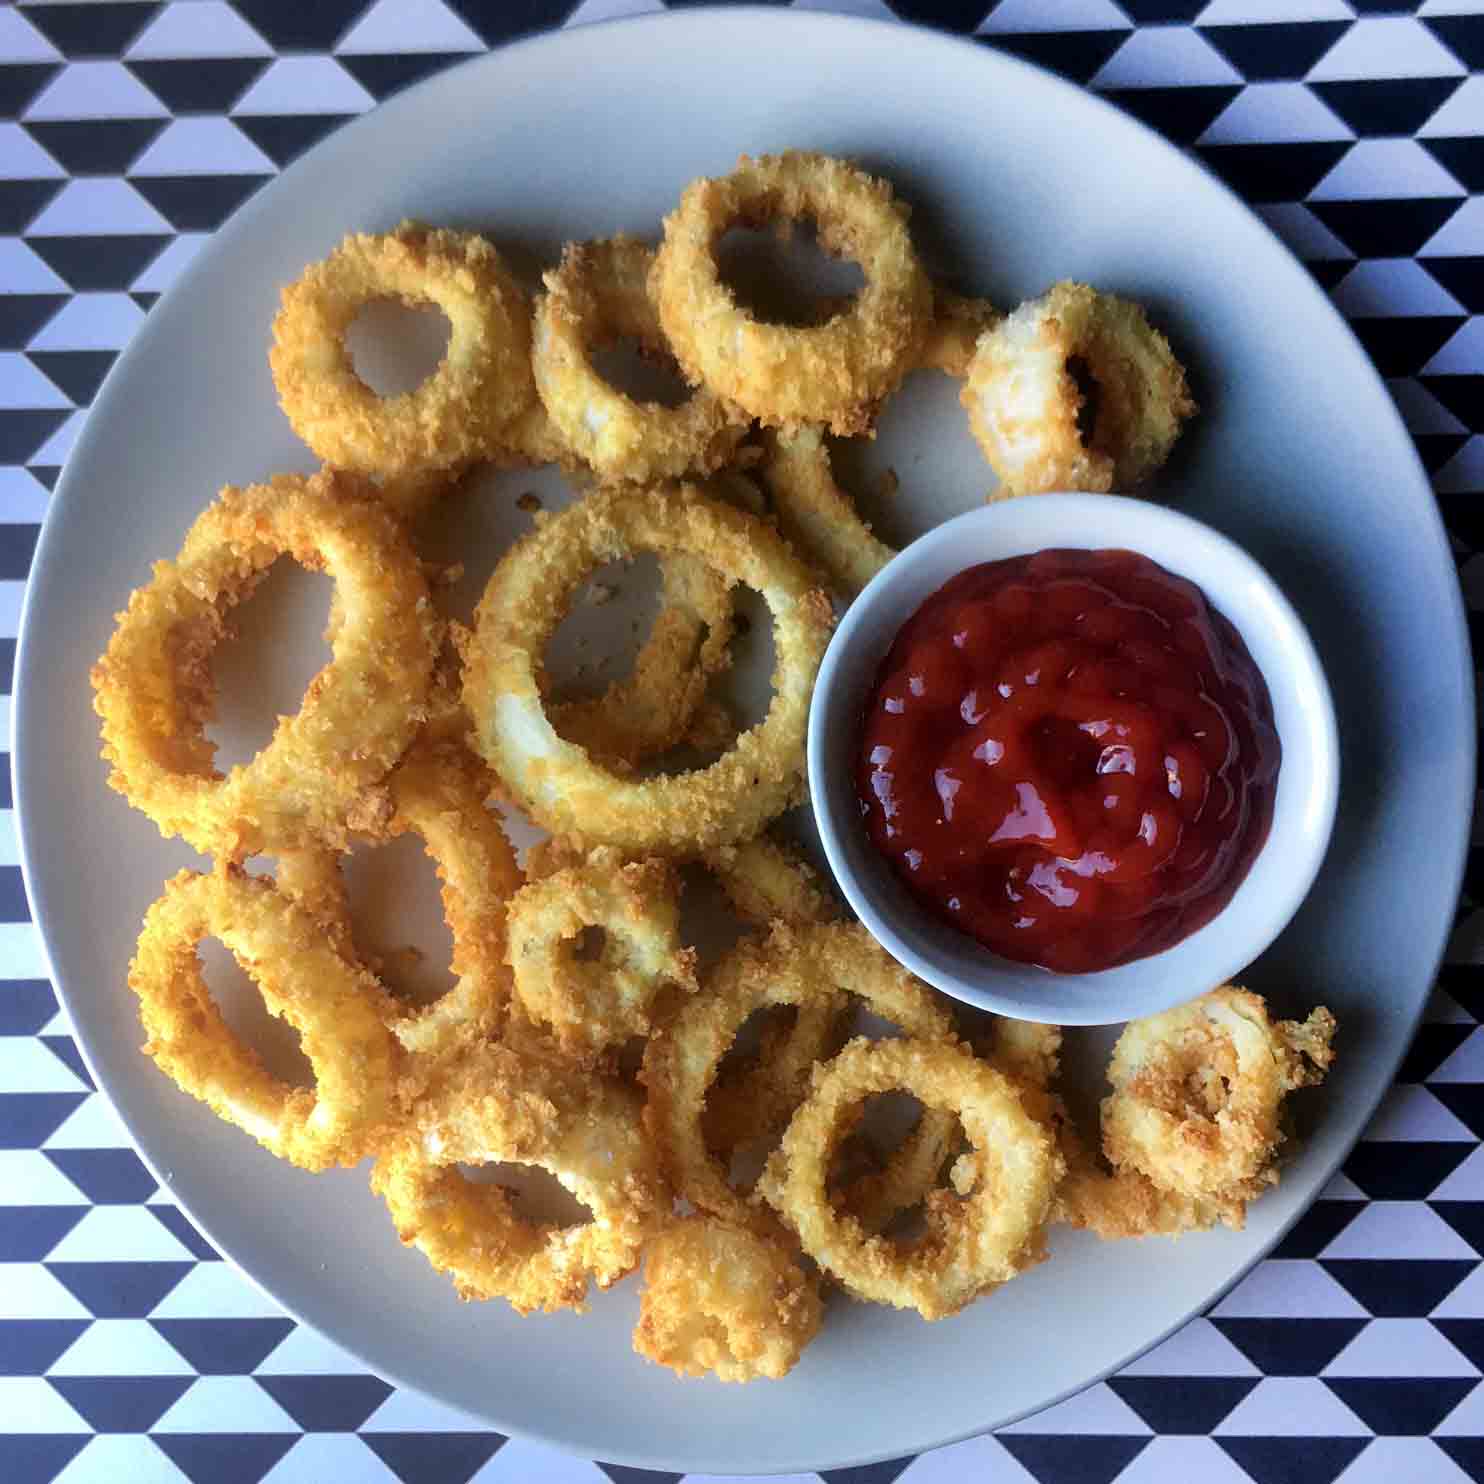 A plate of Keto onion rings with a small bowl of ketchup